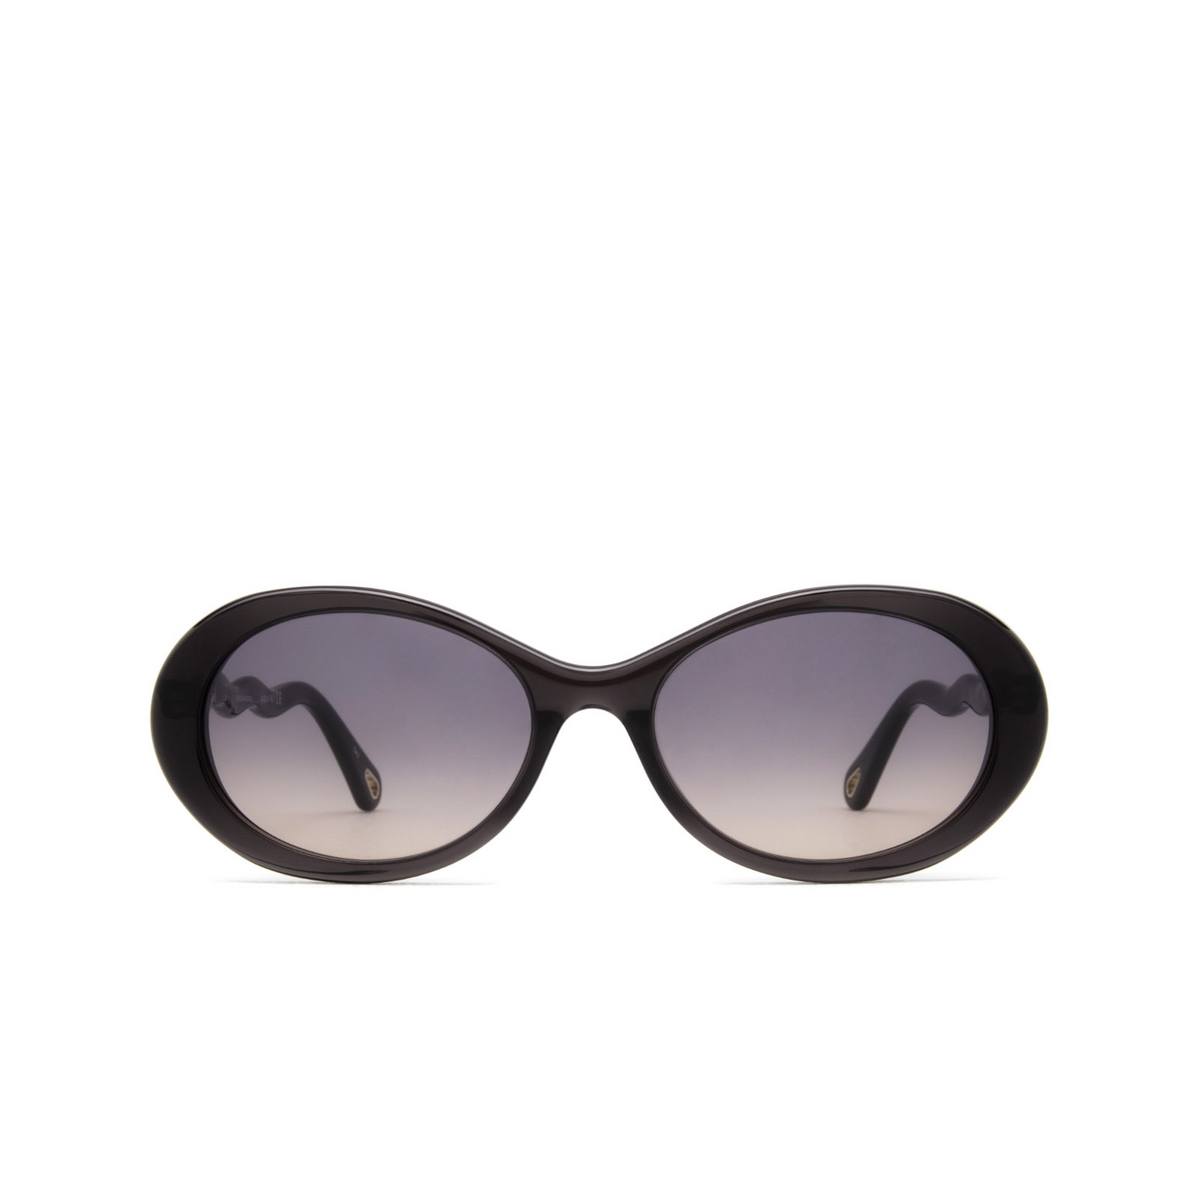 Chloé® Oval Sunglasses: Zelie Oval CH0088S color Grey 001 - front view.